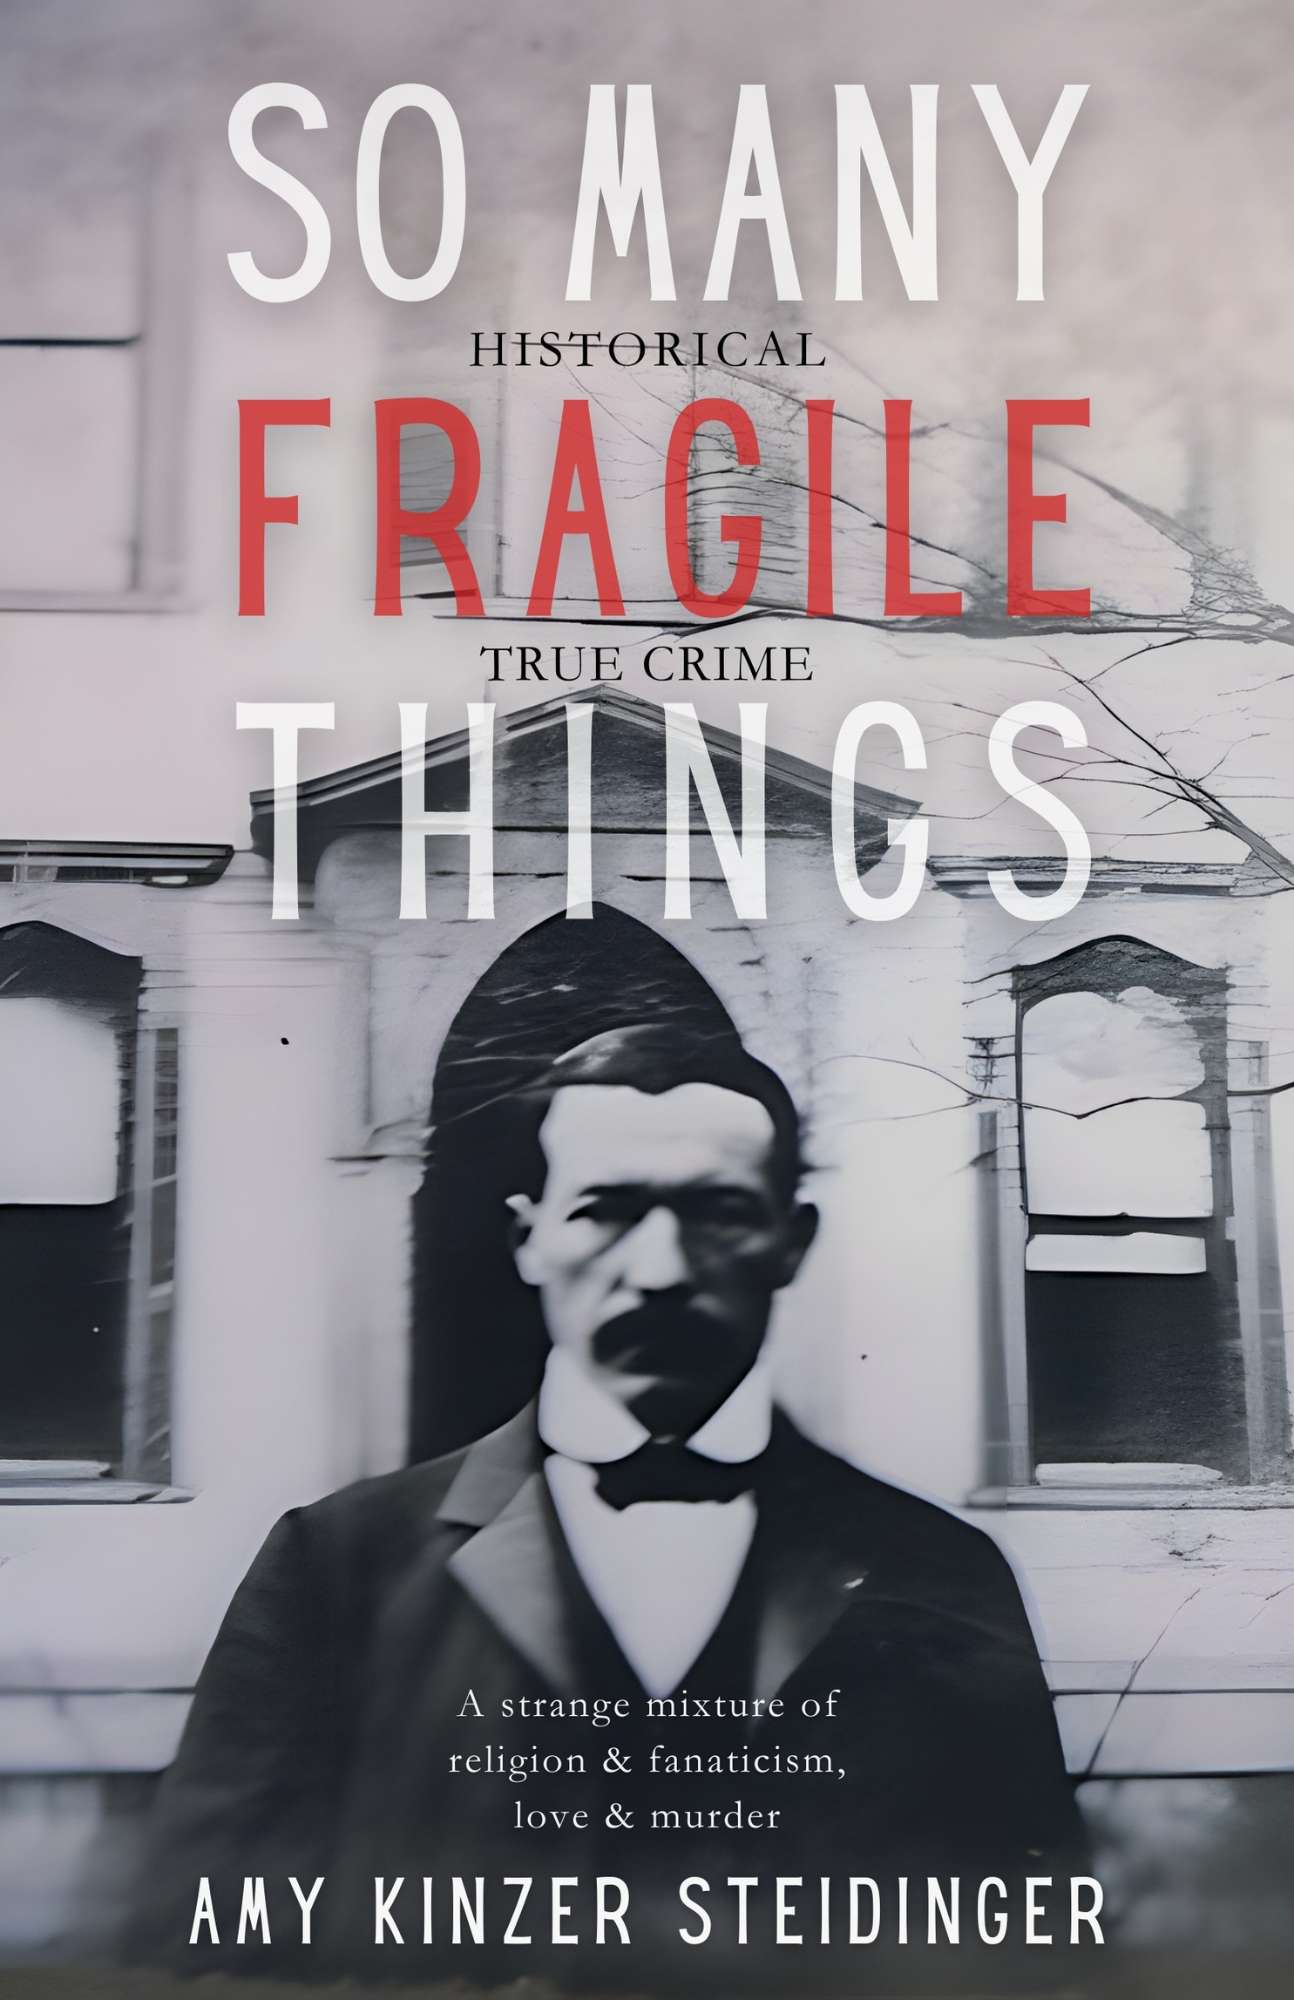 So Many Fragile Things